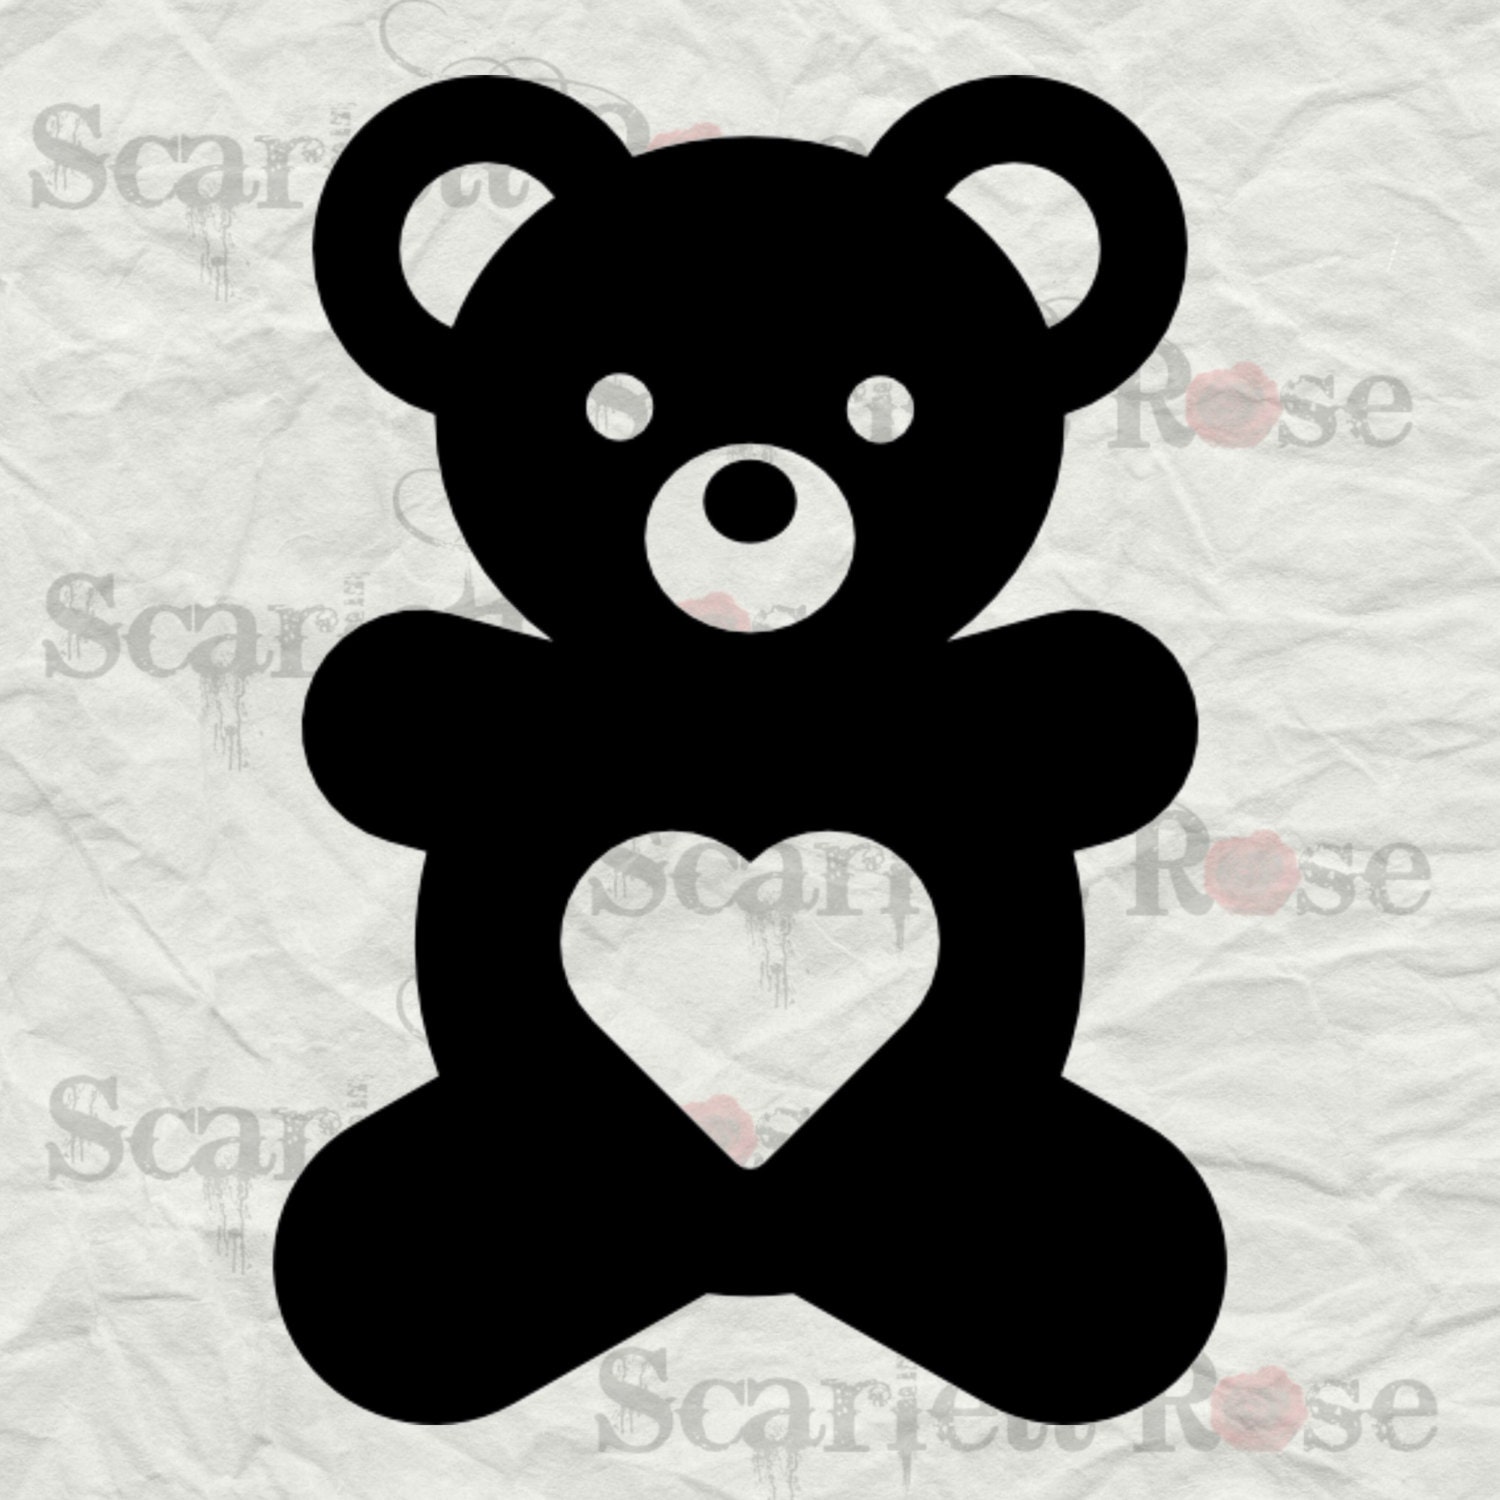 Teddy Bear in Black and White SVG cutting file clipart in svg